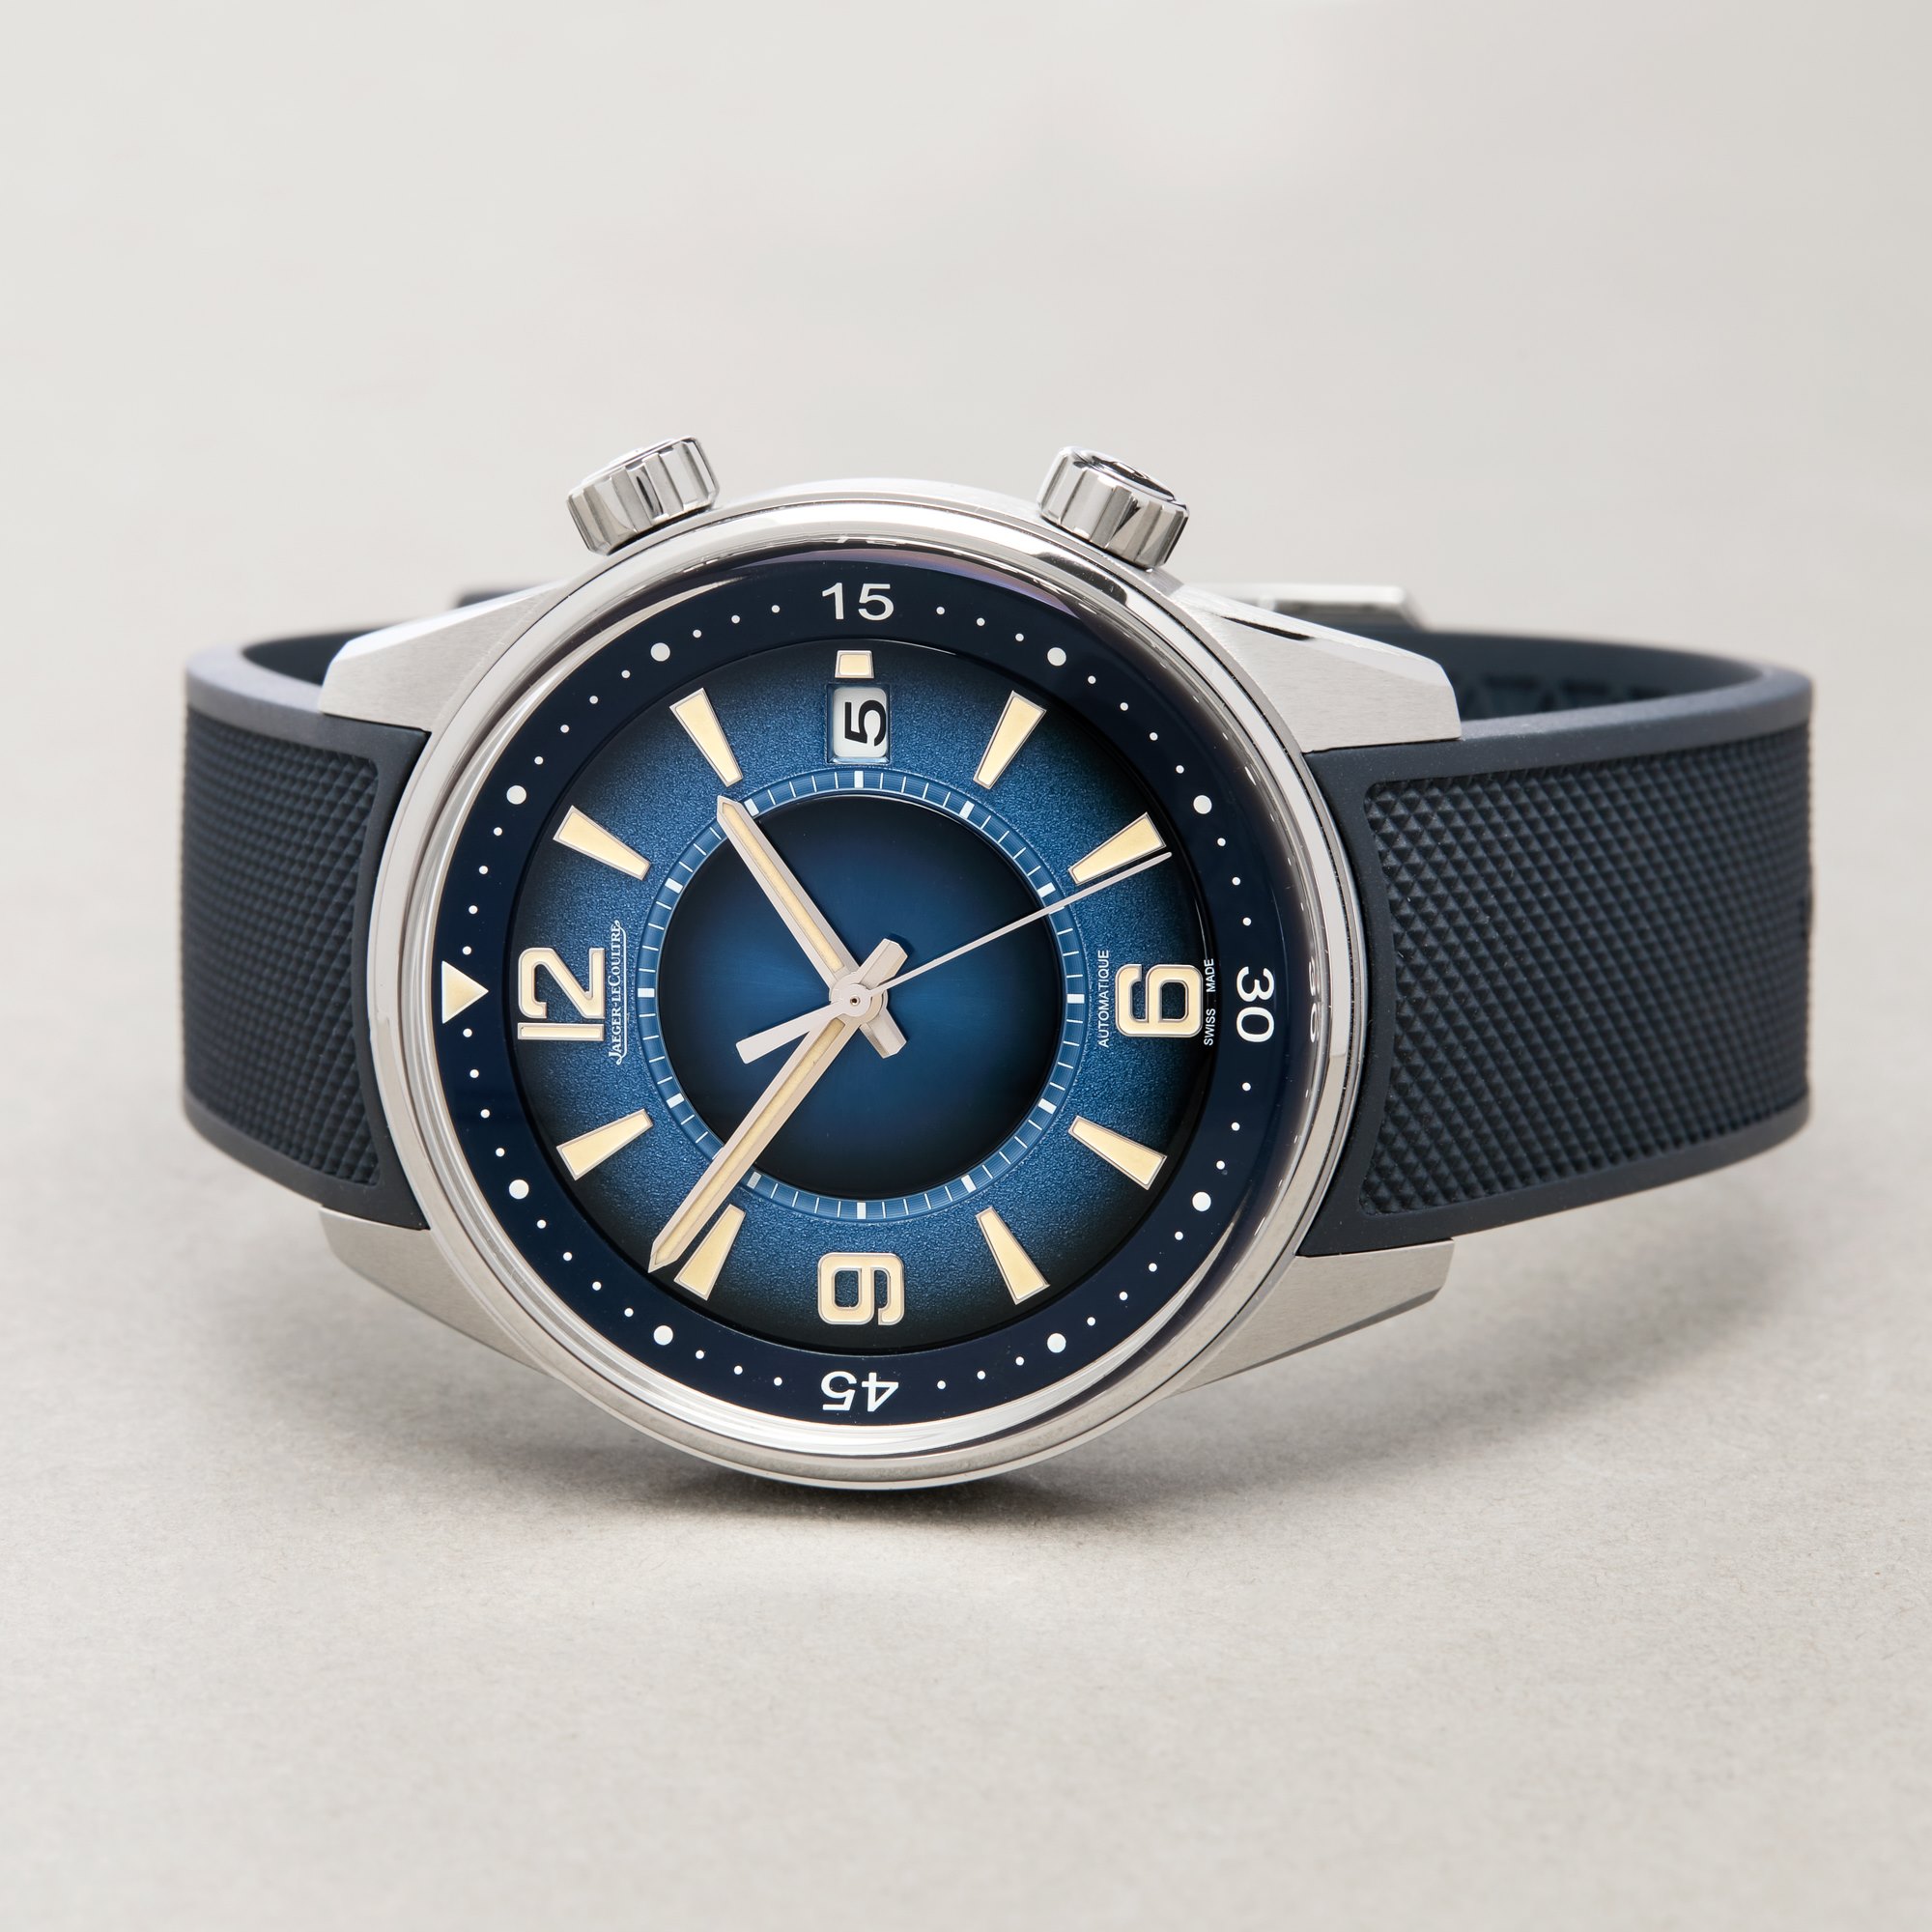 Jaeger-LeCoultre Polaris Date Limited Edition Roestvrij Staal Q9068681